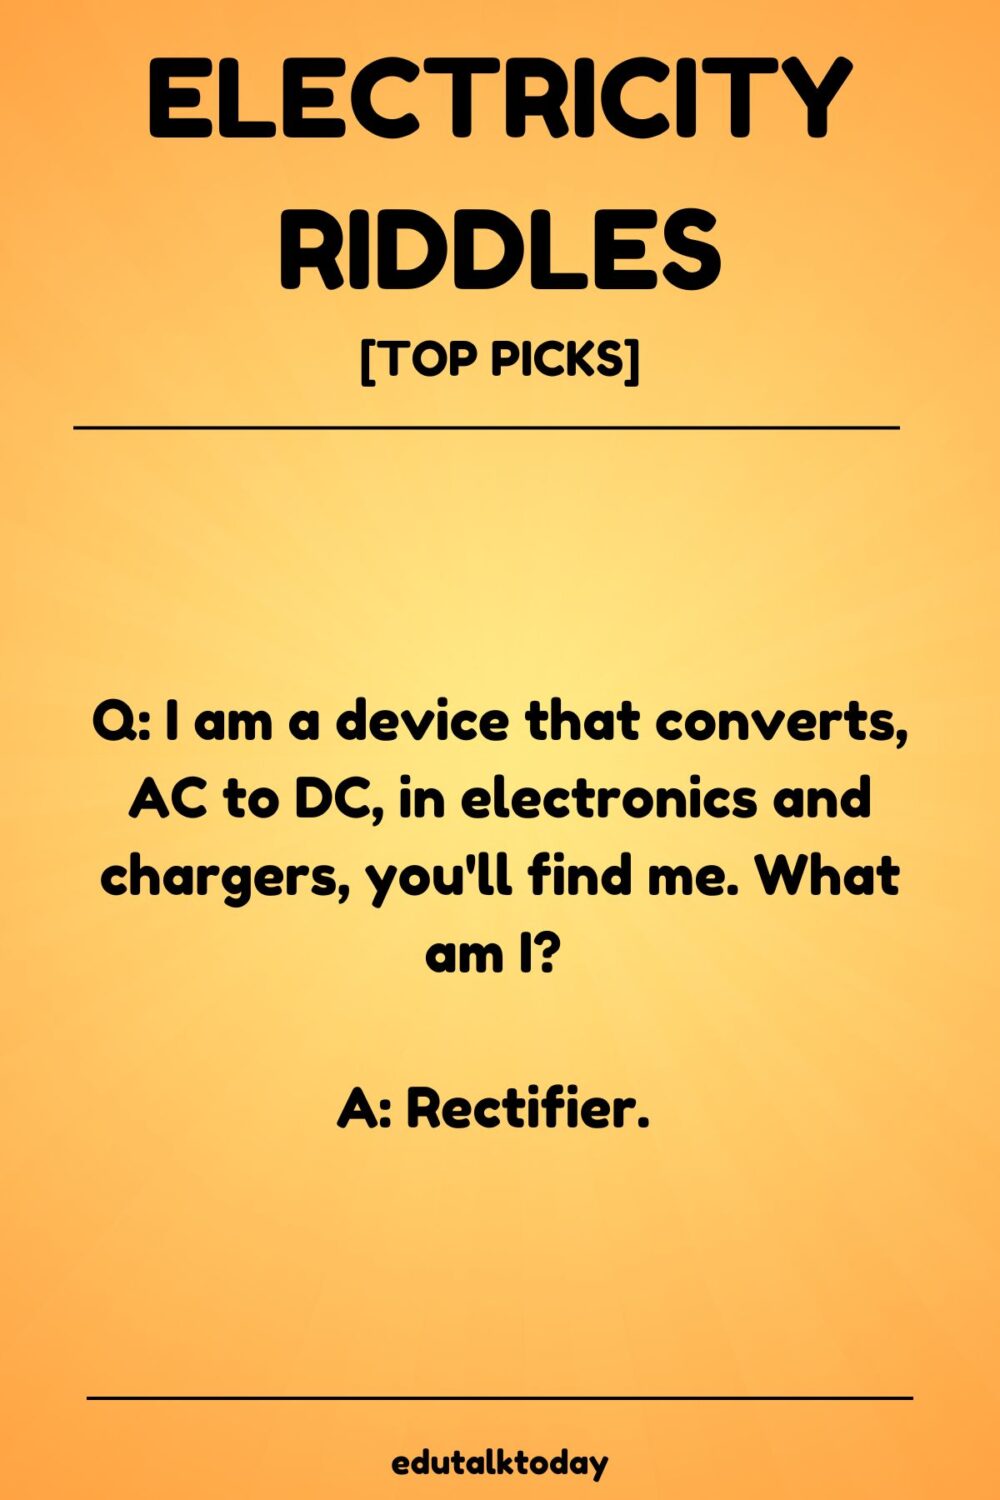 36 Riddles about Electricity